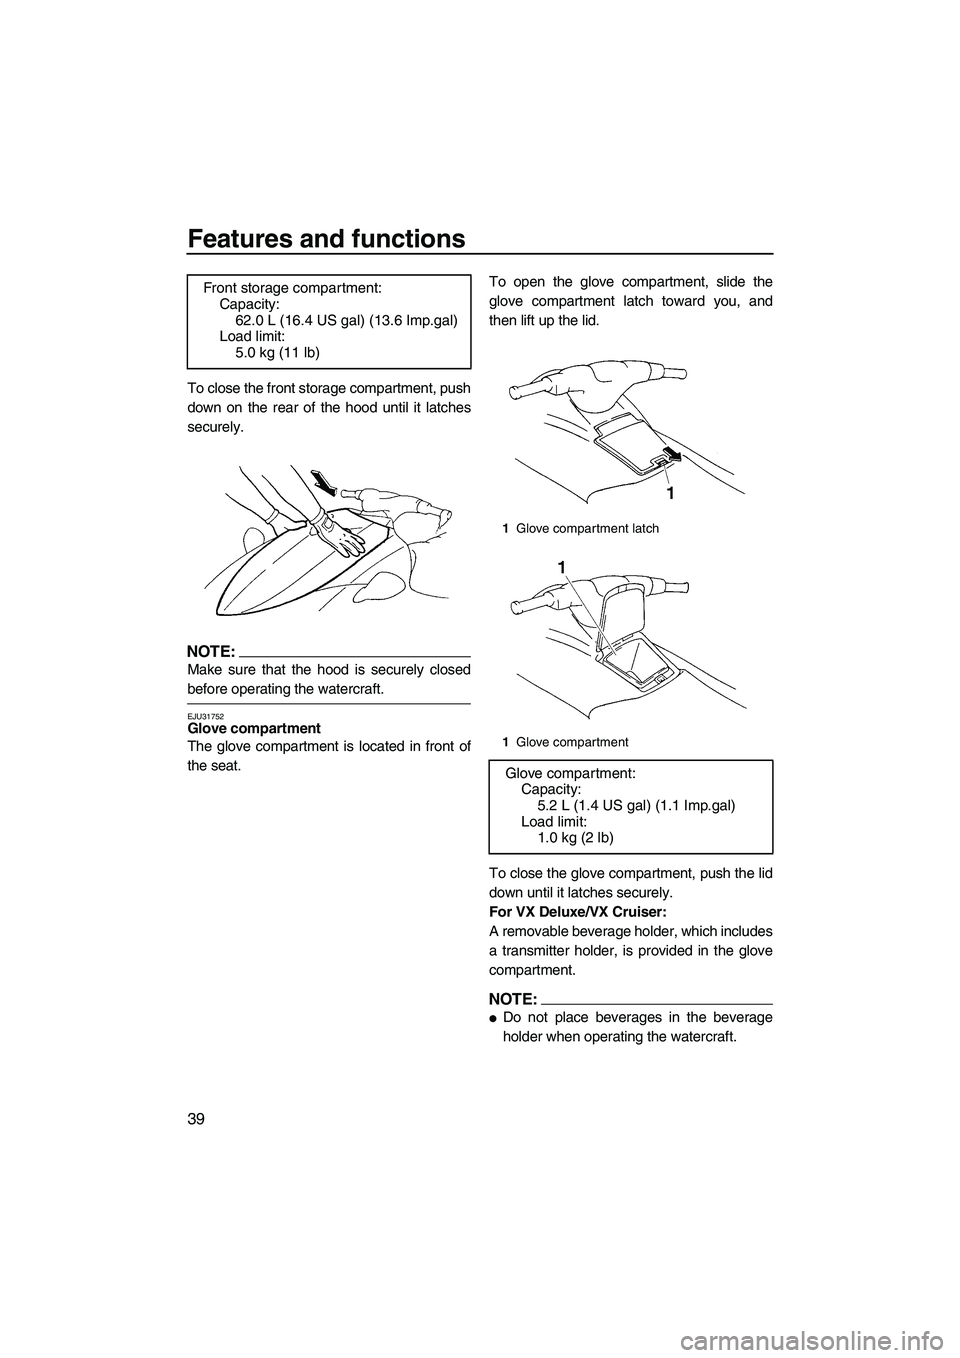 YAMAHA VX SPORT 2007 Service Manual Features and functions
39
To close the front storage compartment, push
down on the rear of the hood until it latches
securely.
NOTE:
Make sure that the hood is securely closed
before operating the wat